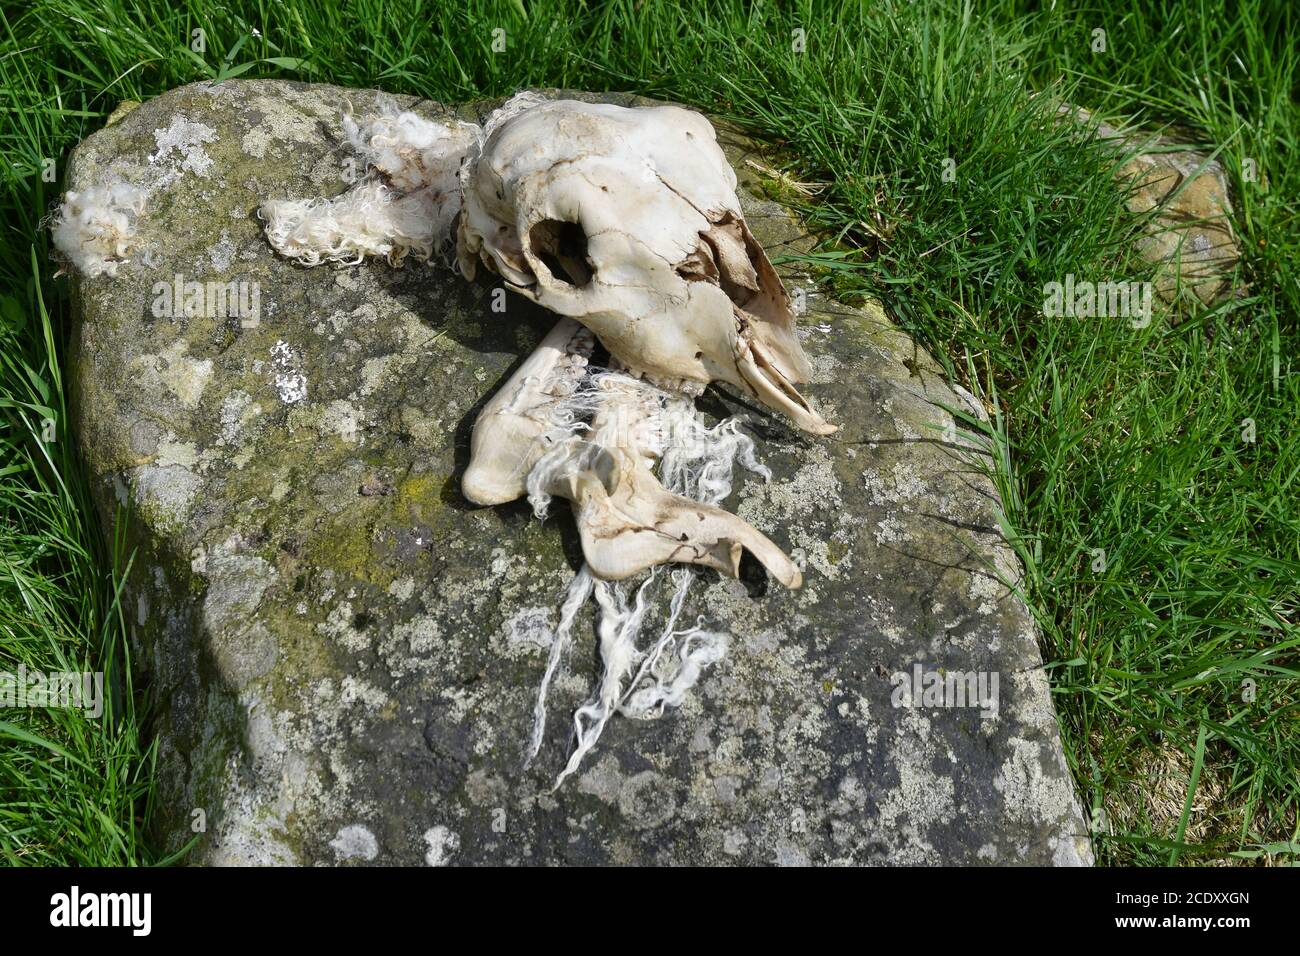 Skull and wool of dead sheep on a rock with grass background. Taken in situ in farmer's field. Stock Photo